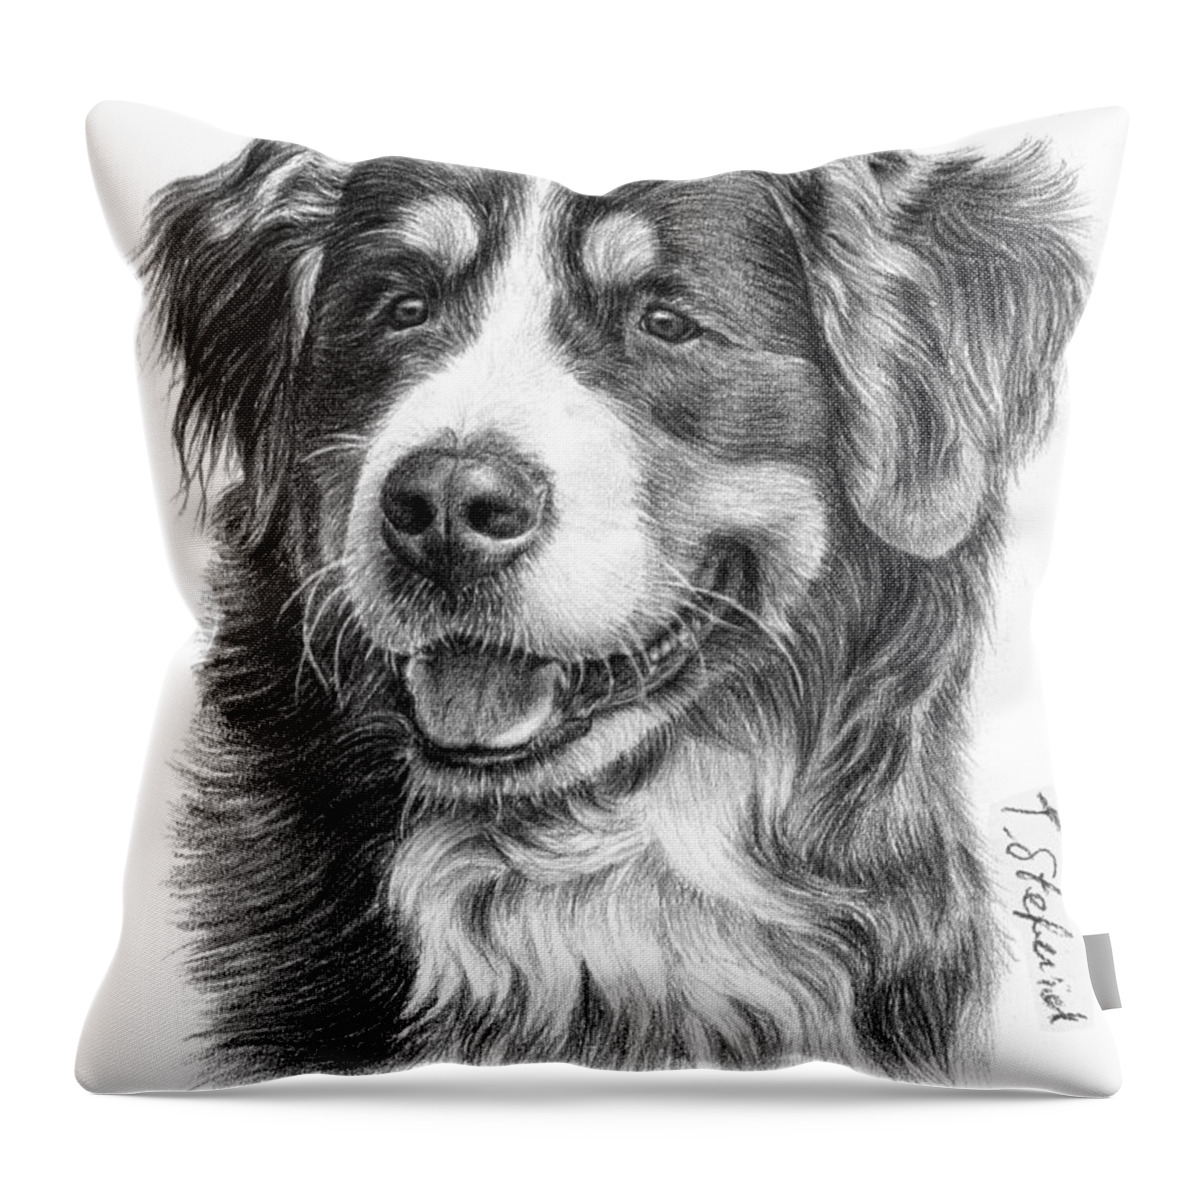 18x18 Funny Berner Gifts Bernese Mountain Dog Floss Dance Throw Pillow Multicolor 